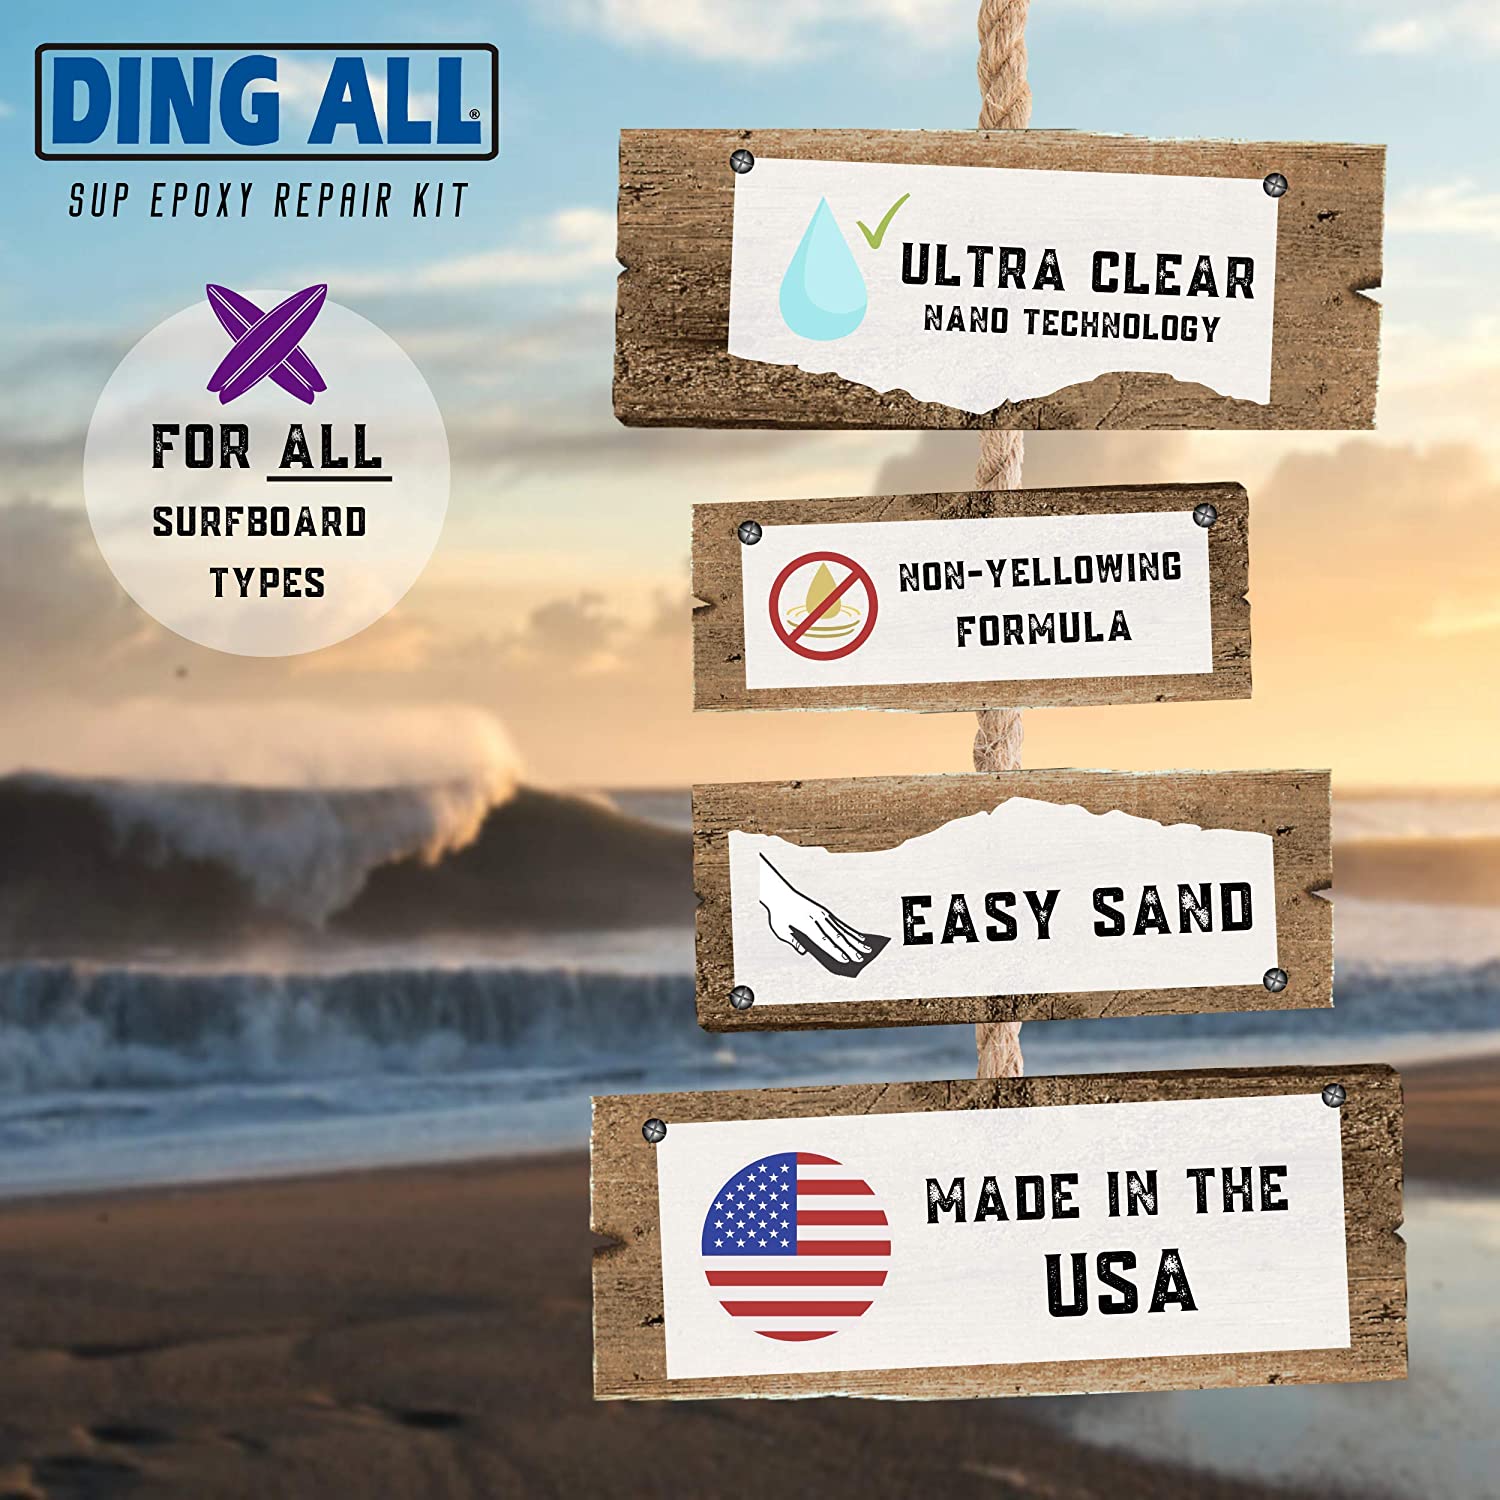 Ding All Super Stand Up Paddle Board (SUP) Epoxy Repair Kit with a Superior, Eco-Friendly and Non Yellowing Formula for Small to Medium Ding Repairs